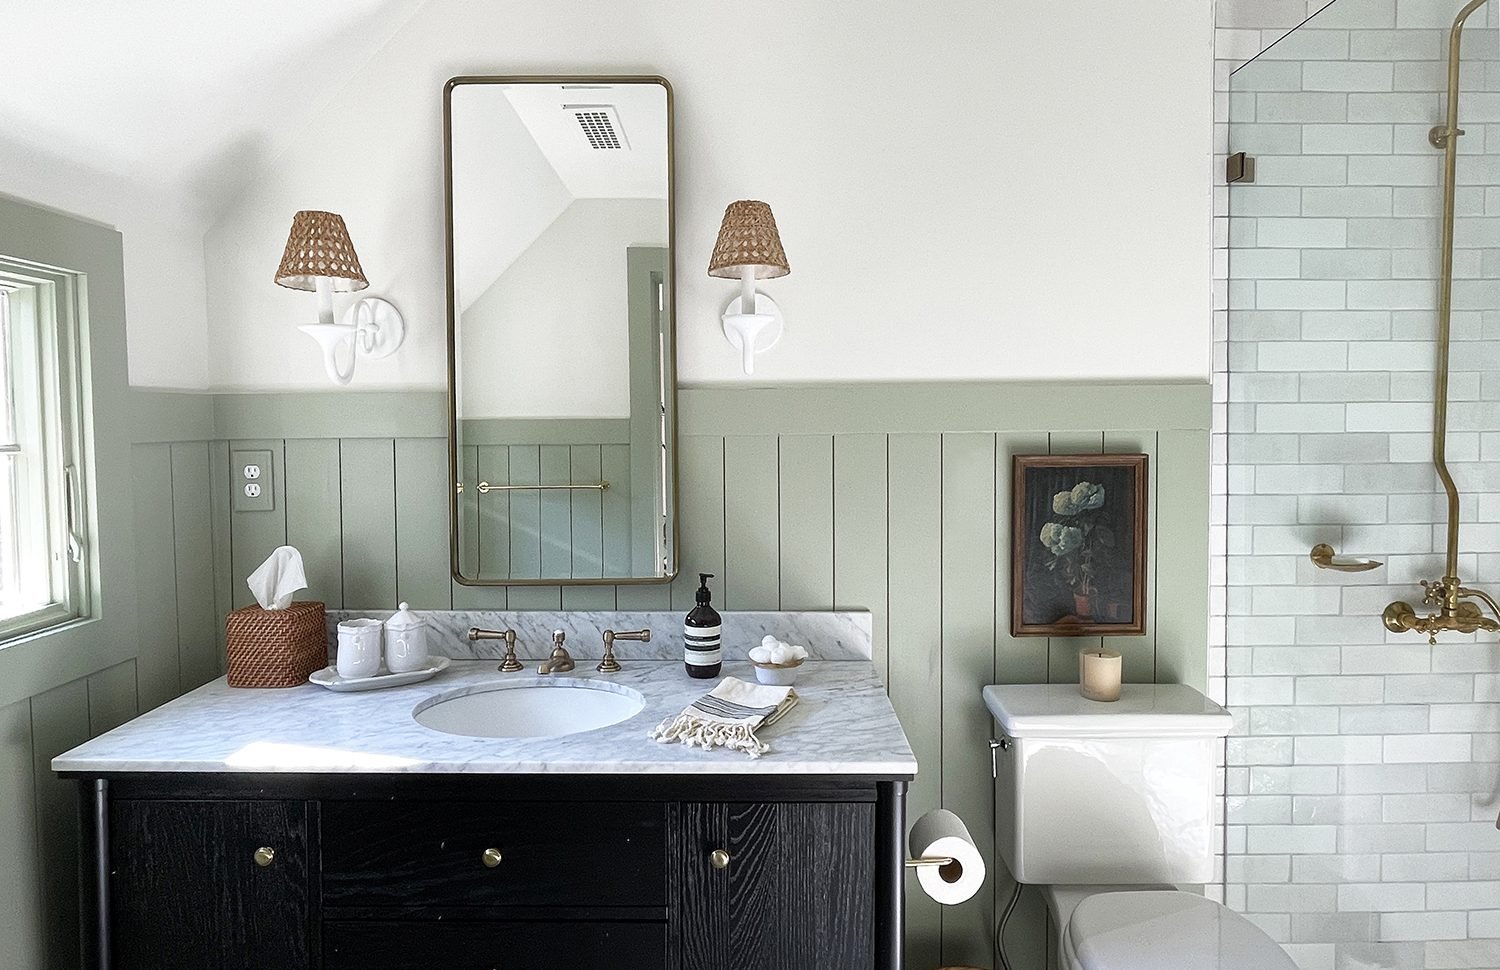 10 Sage Green Paint Colors To Make Your Home Feel Calming